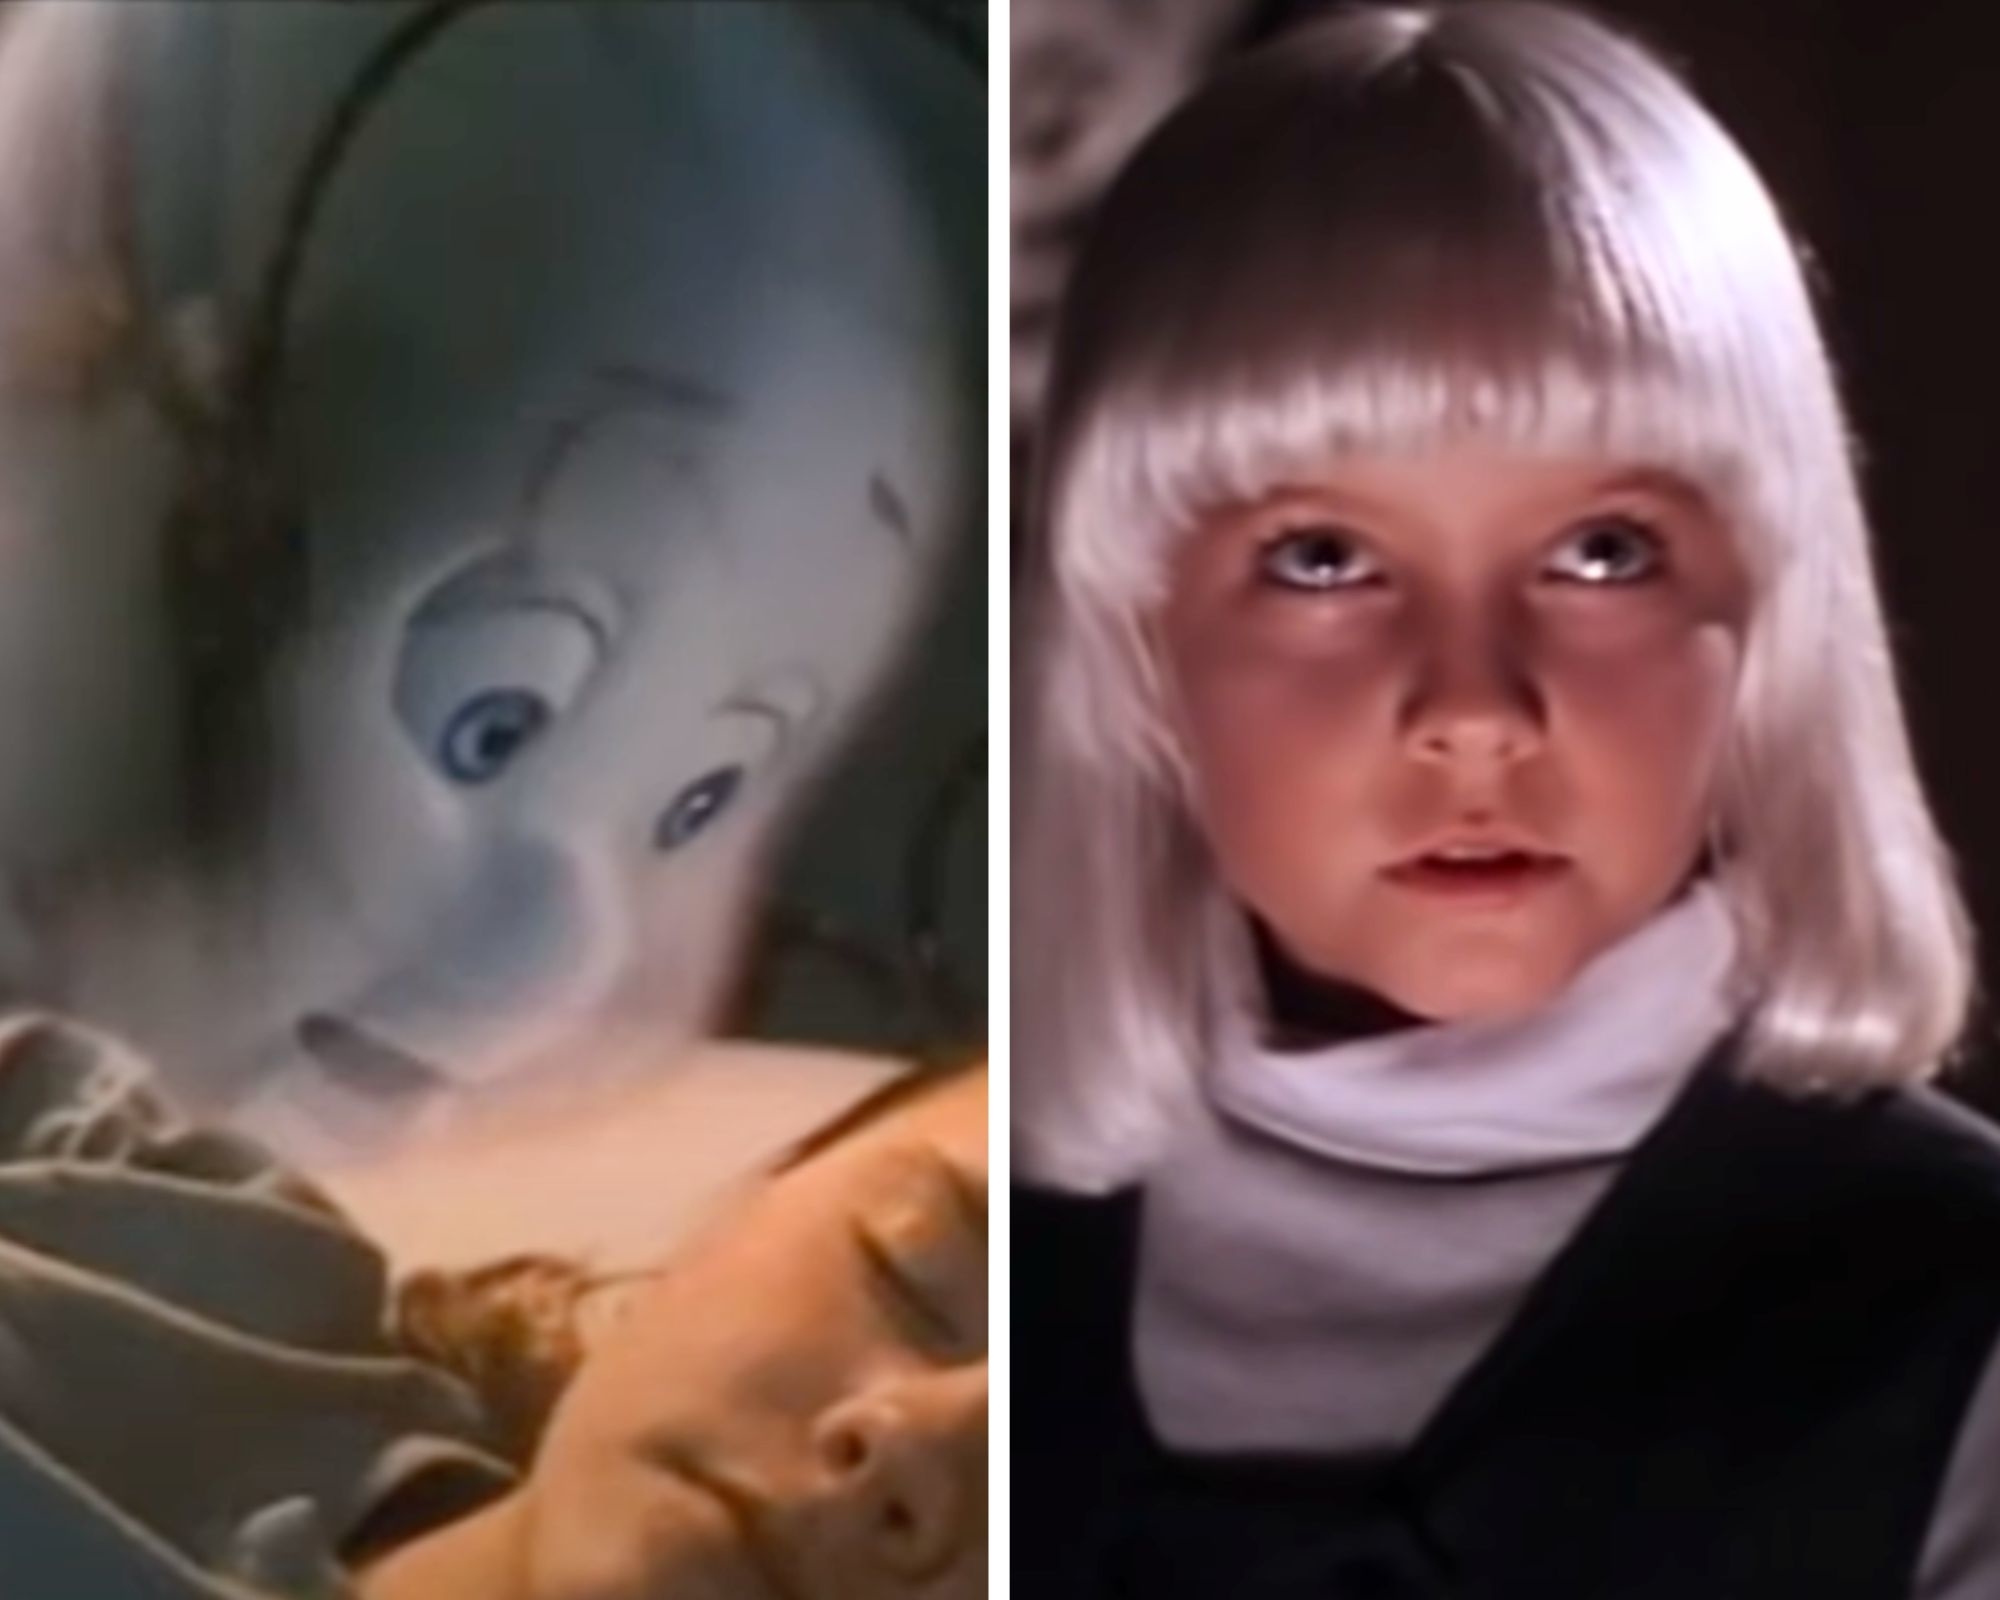 Casper the friendly ghost, and one of the possessed children in Village of the Damned